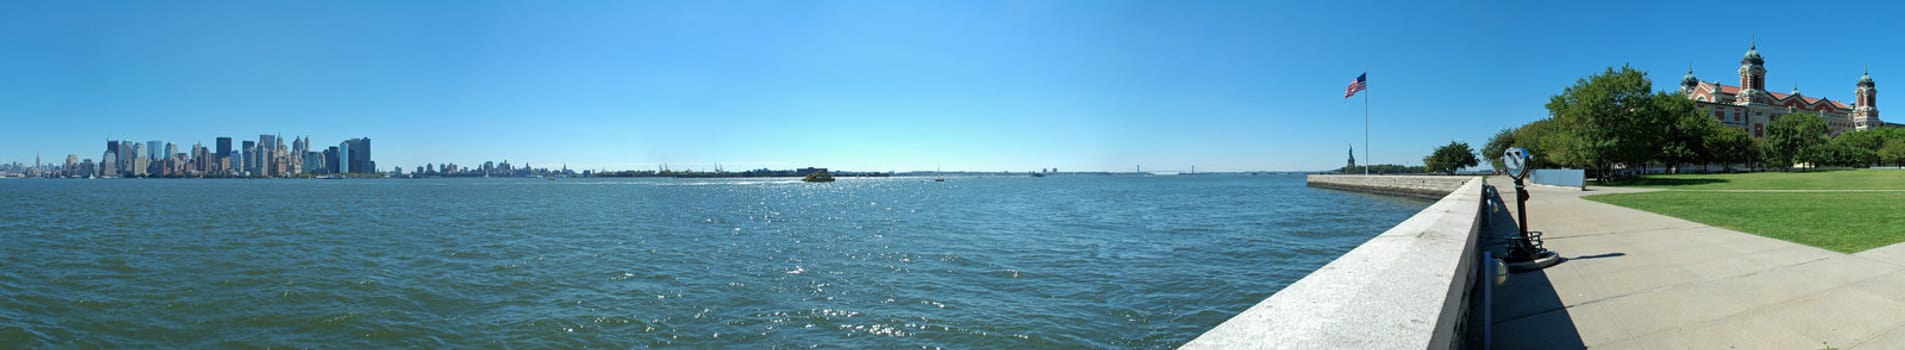 panoramic view from ellis island, manhattan and statue of liberty in picture